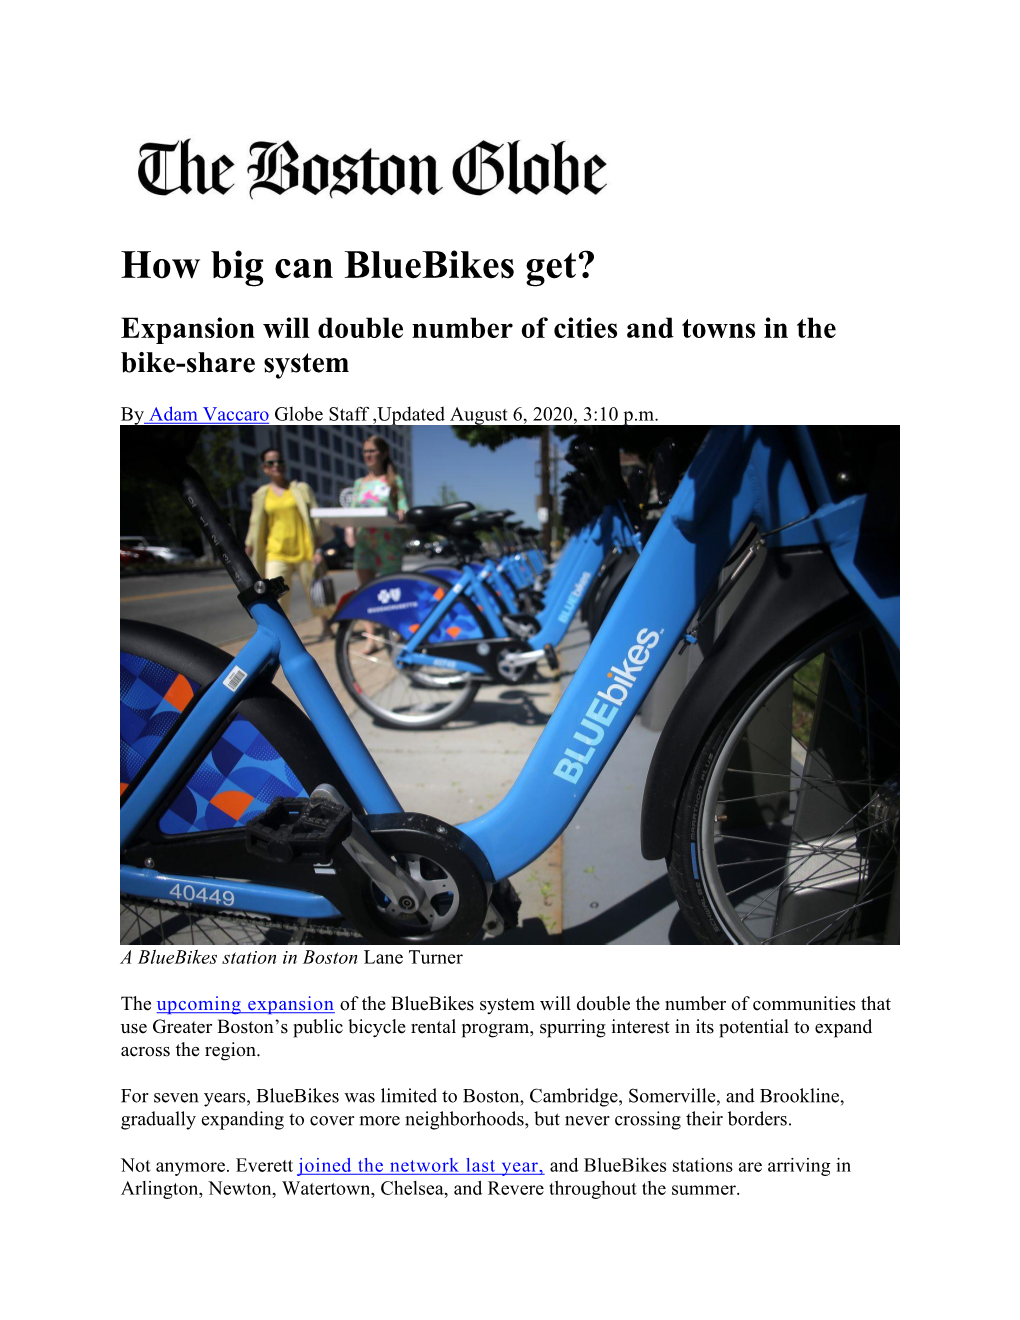 How Big Can Bluebikes Get? Expansion Will Double Number of Cities and Towns in the Bike-Share System